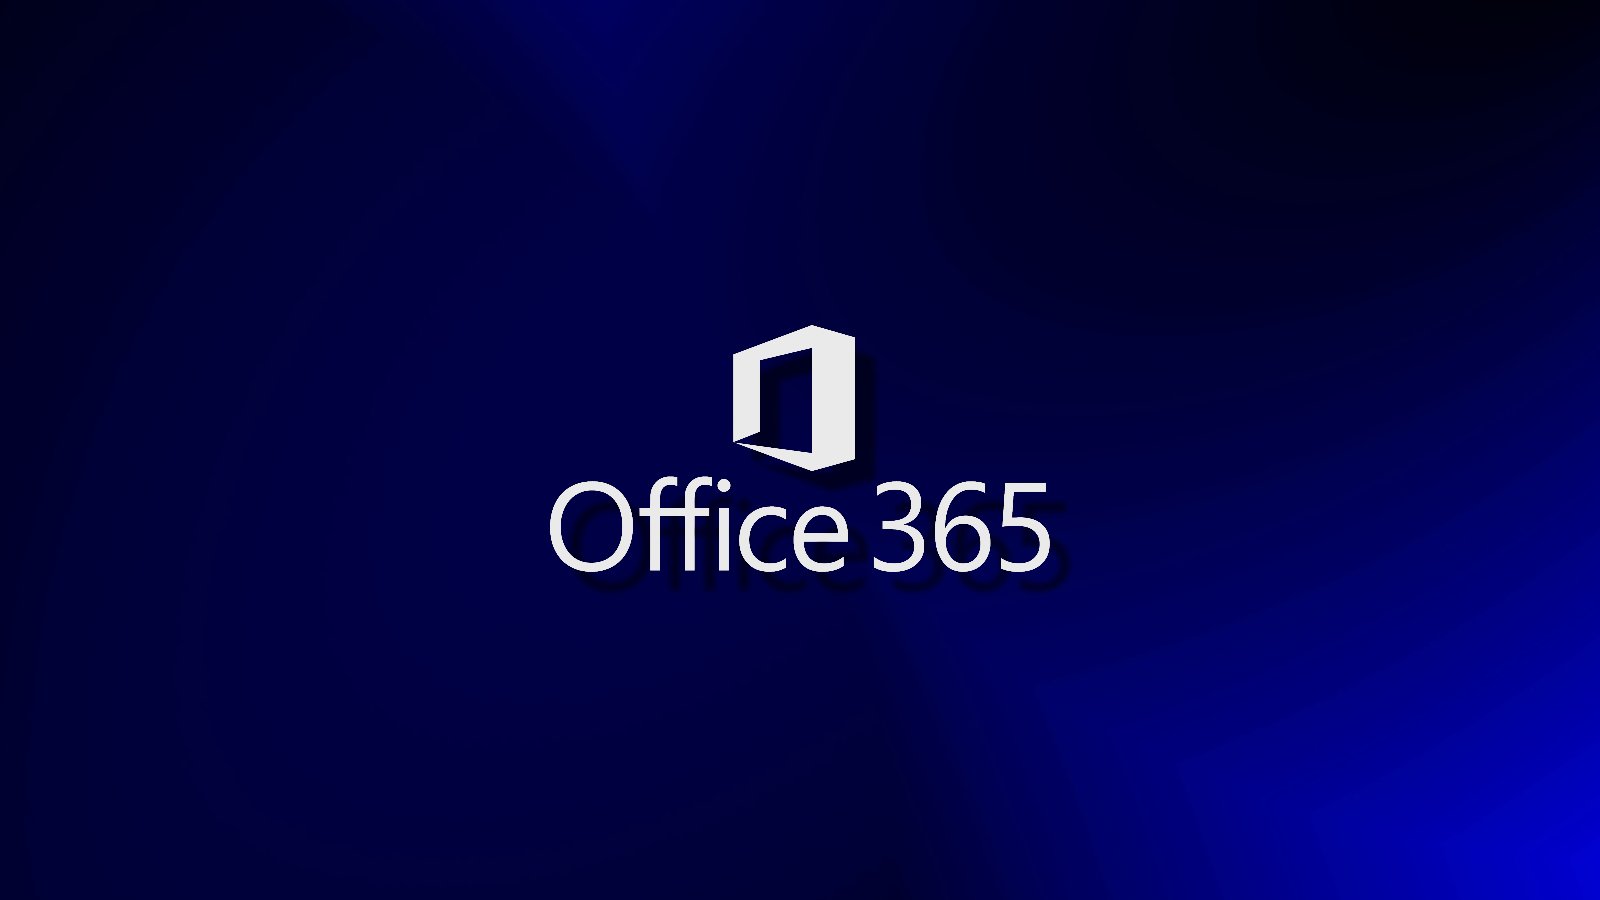 Office 365 boosts email security against MITM, downgrade attacks